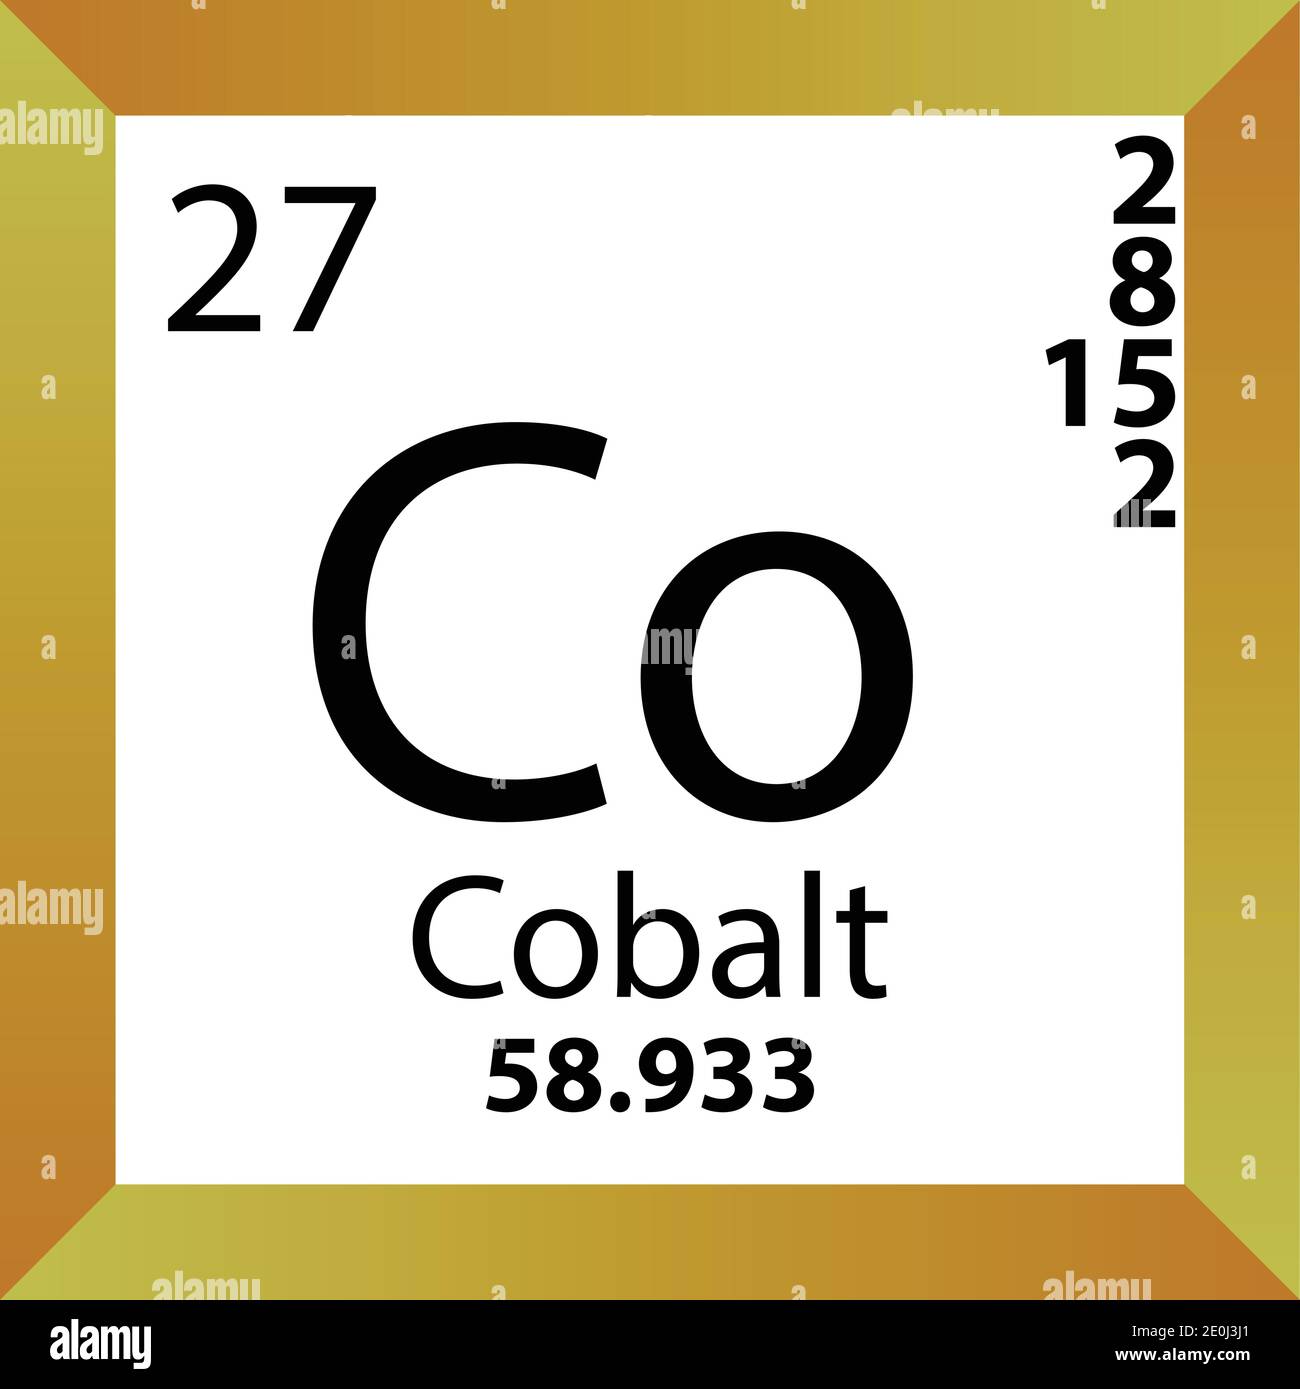 Co Cobalt Chemical Element Periodic Table. Single vector illustration, colorful Icon with molar mass, electron conf. and atomic number. Stock Vector